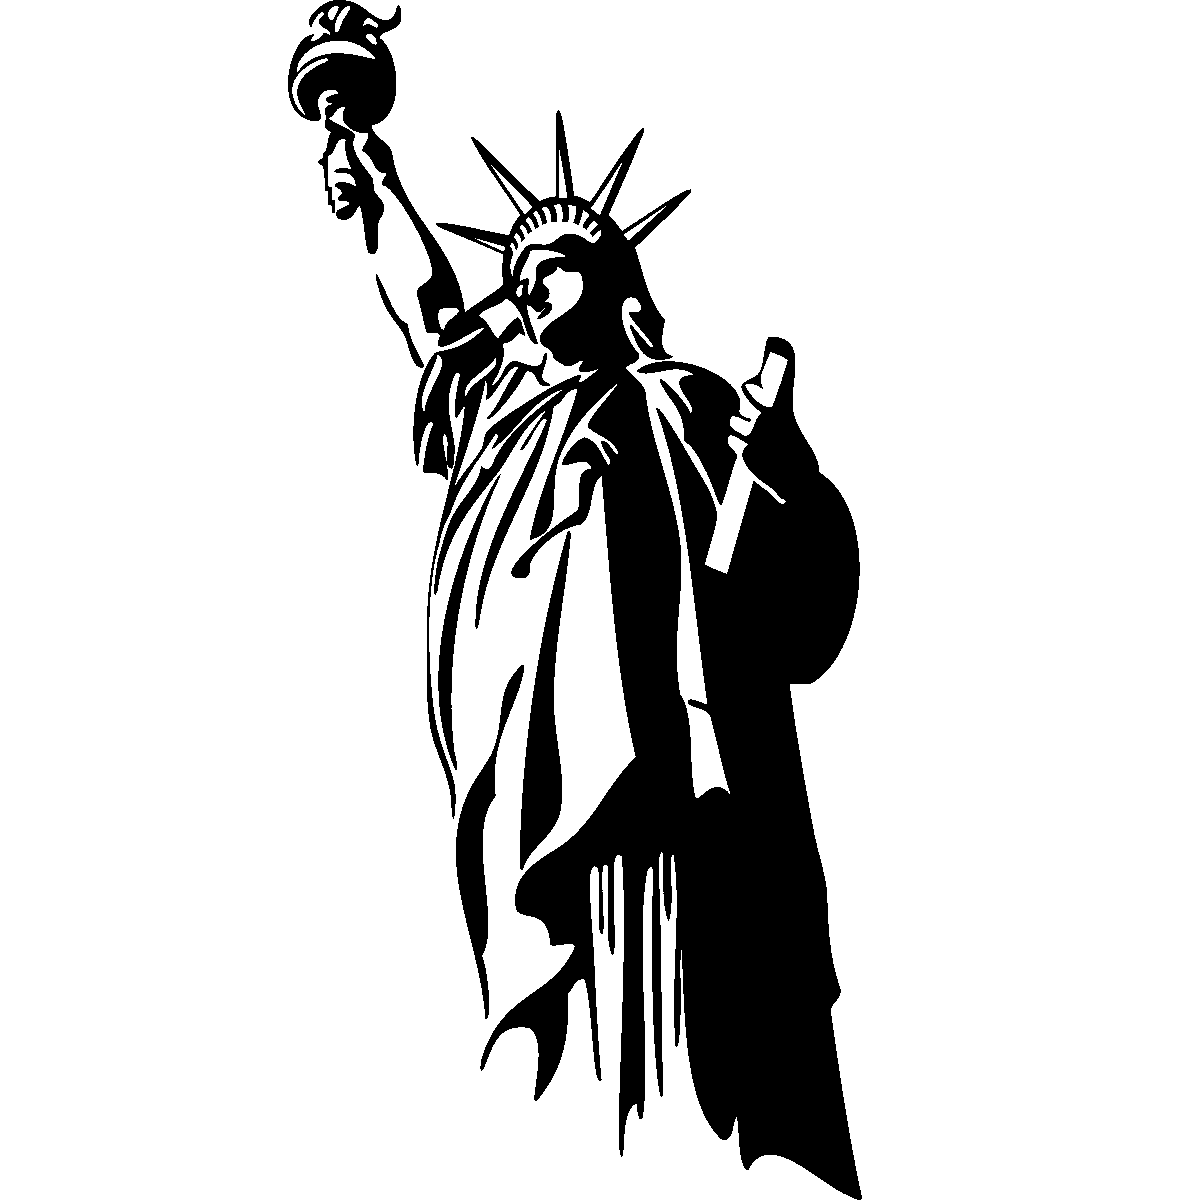 Statue of Liberty Drawing Clip art - statue of liberty png download ...